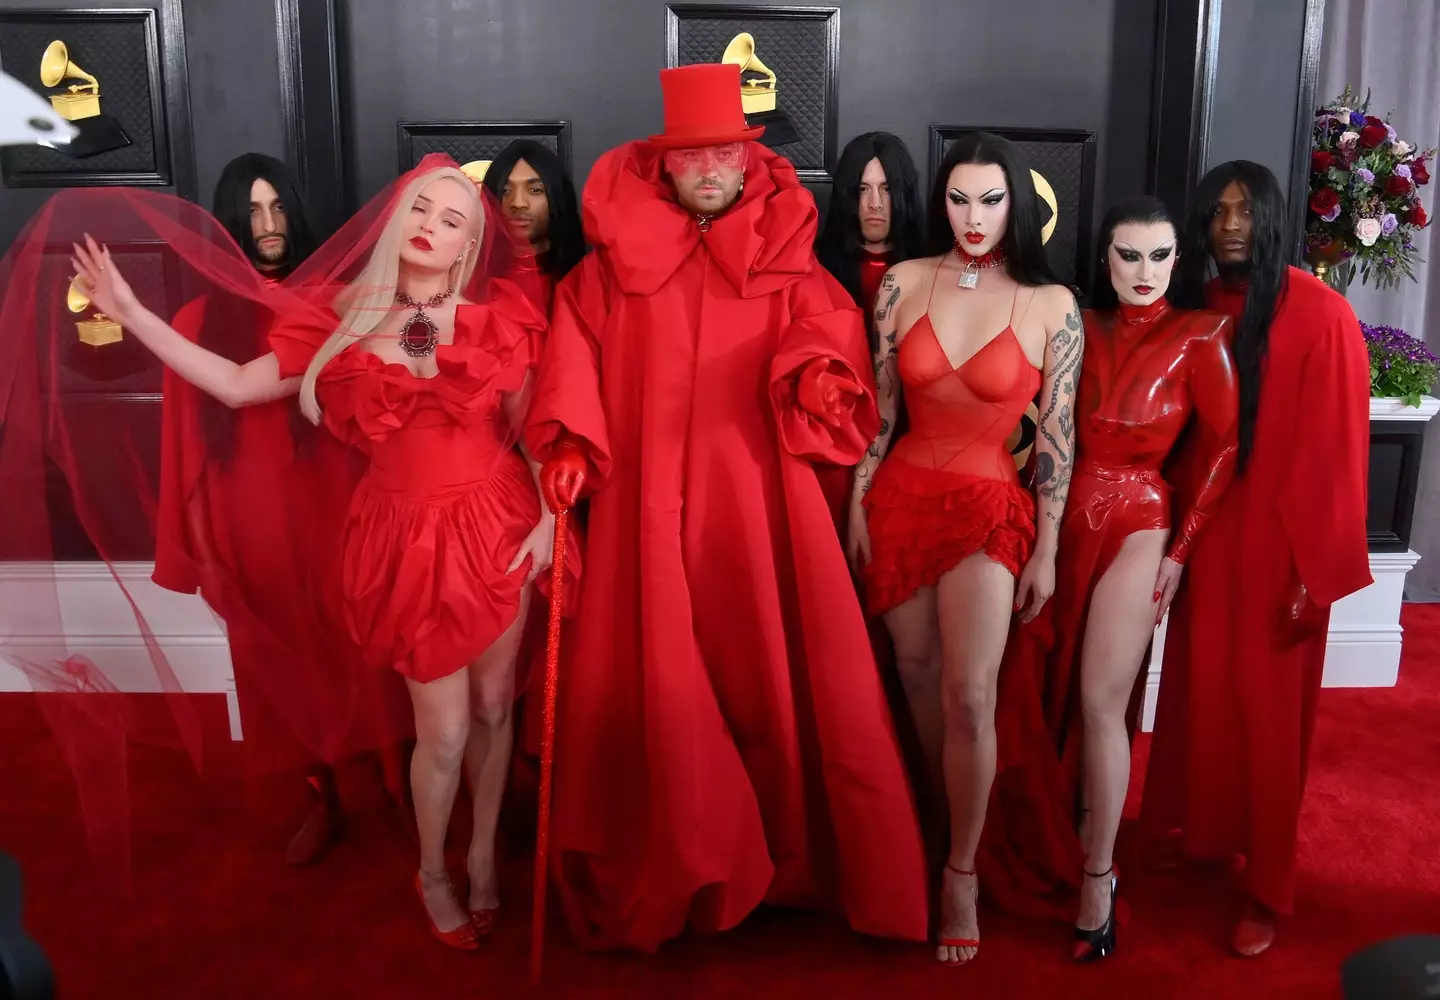 Smith and Petras showed up at the Grammys dressed in red and ready to perform.